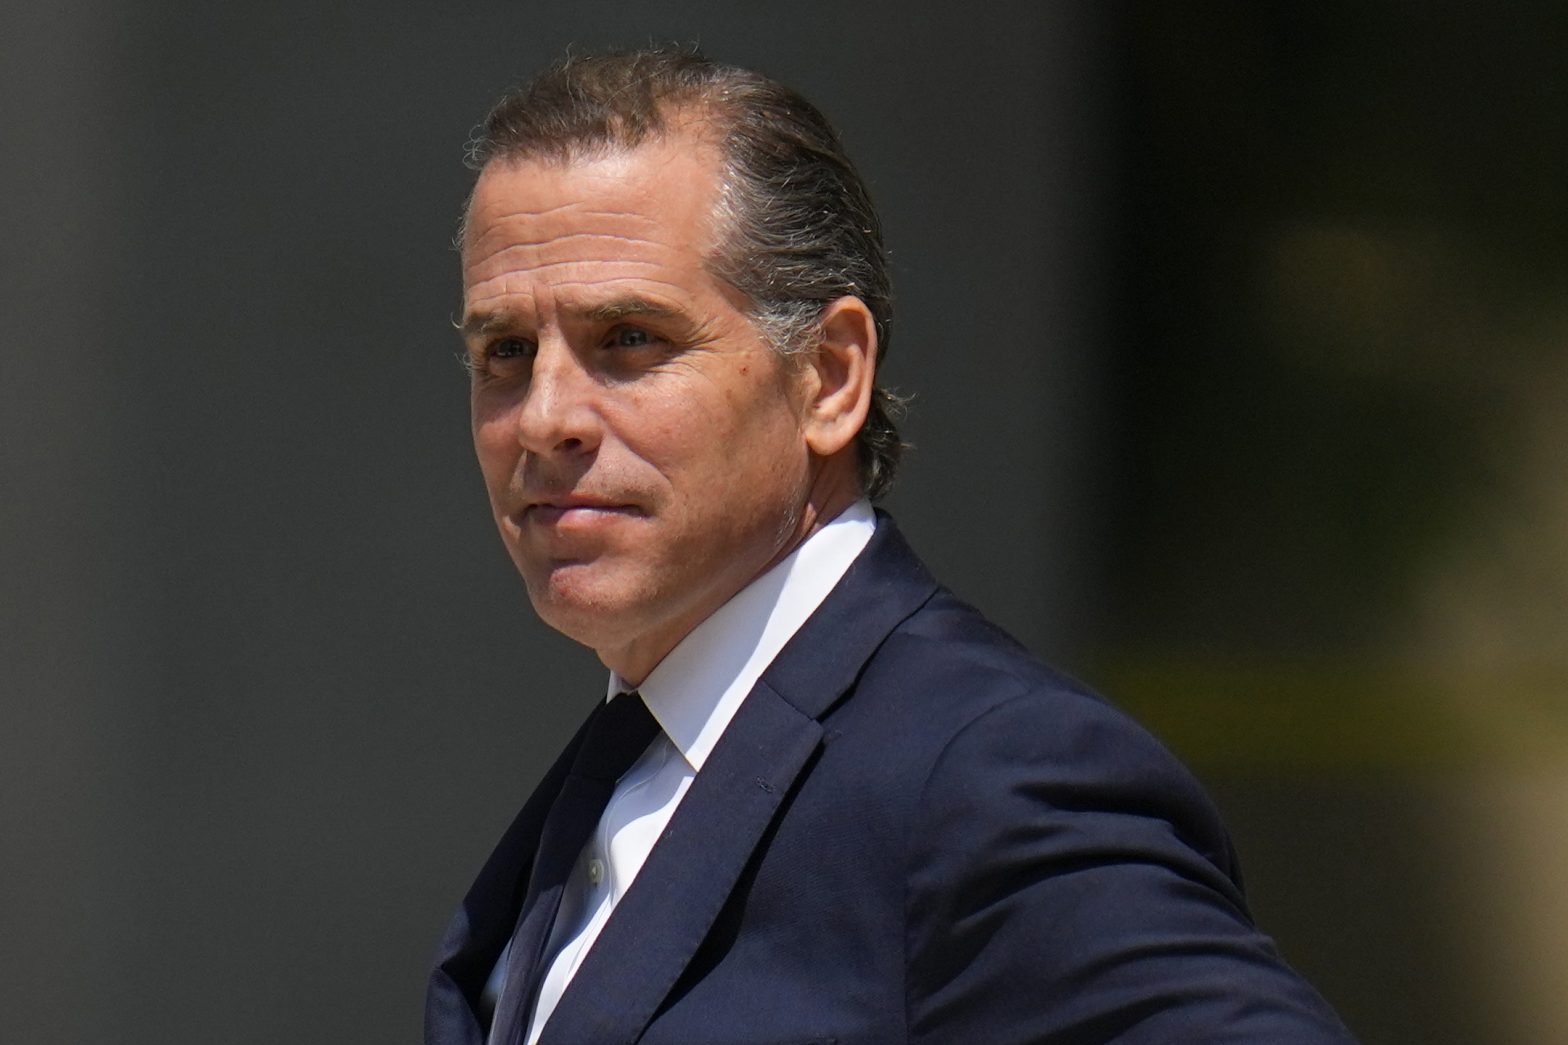 Hunter Biden Says IRS Invaded His Privacy After Agents Disclosed His Tax Records